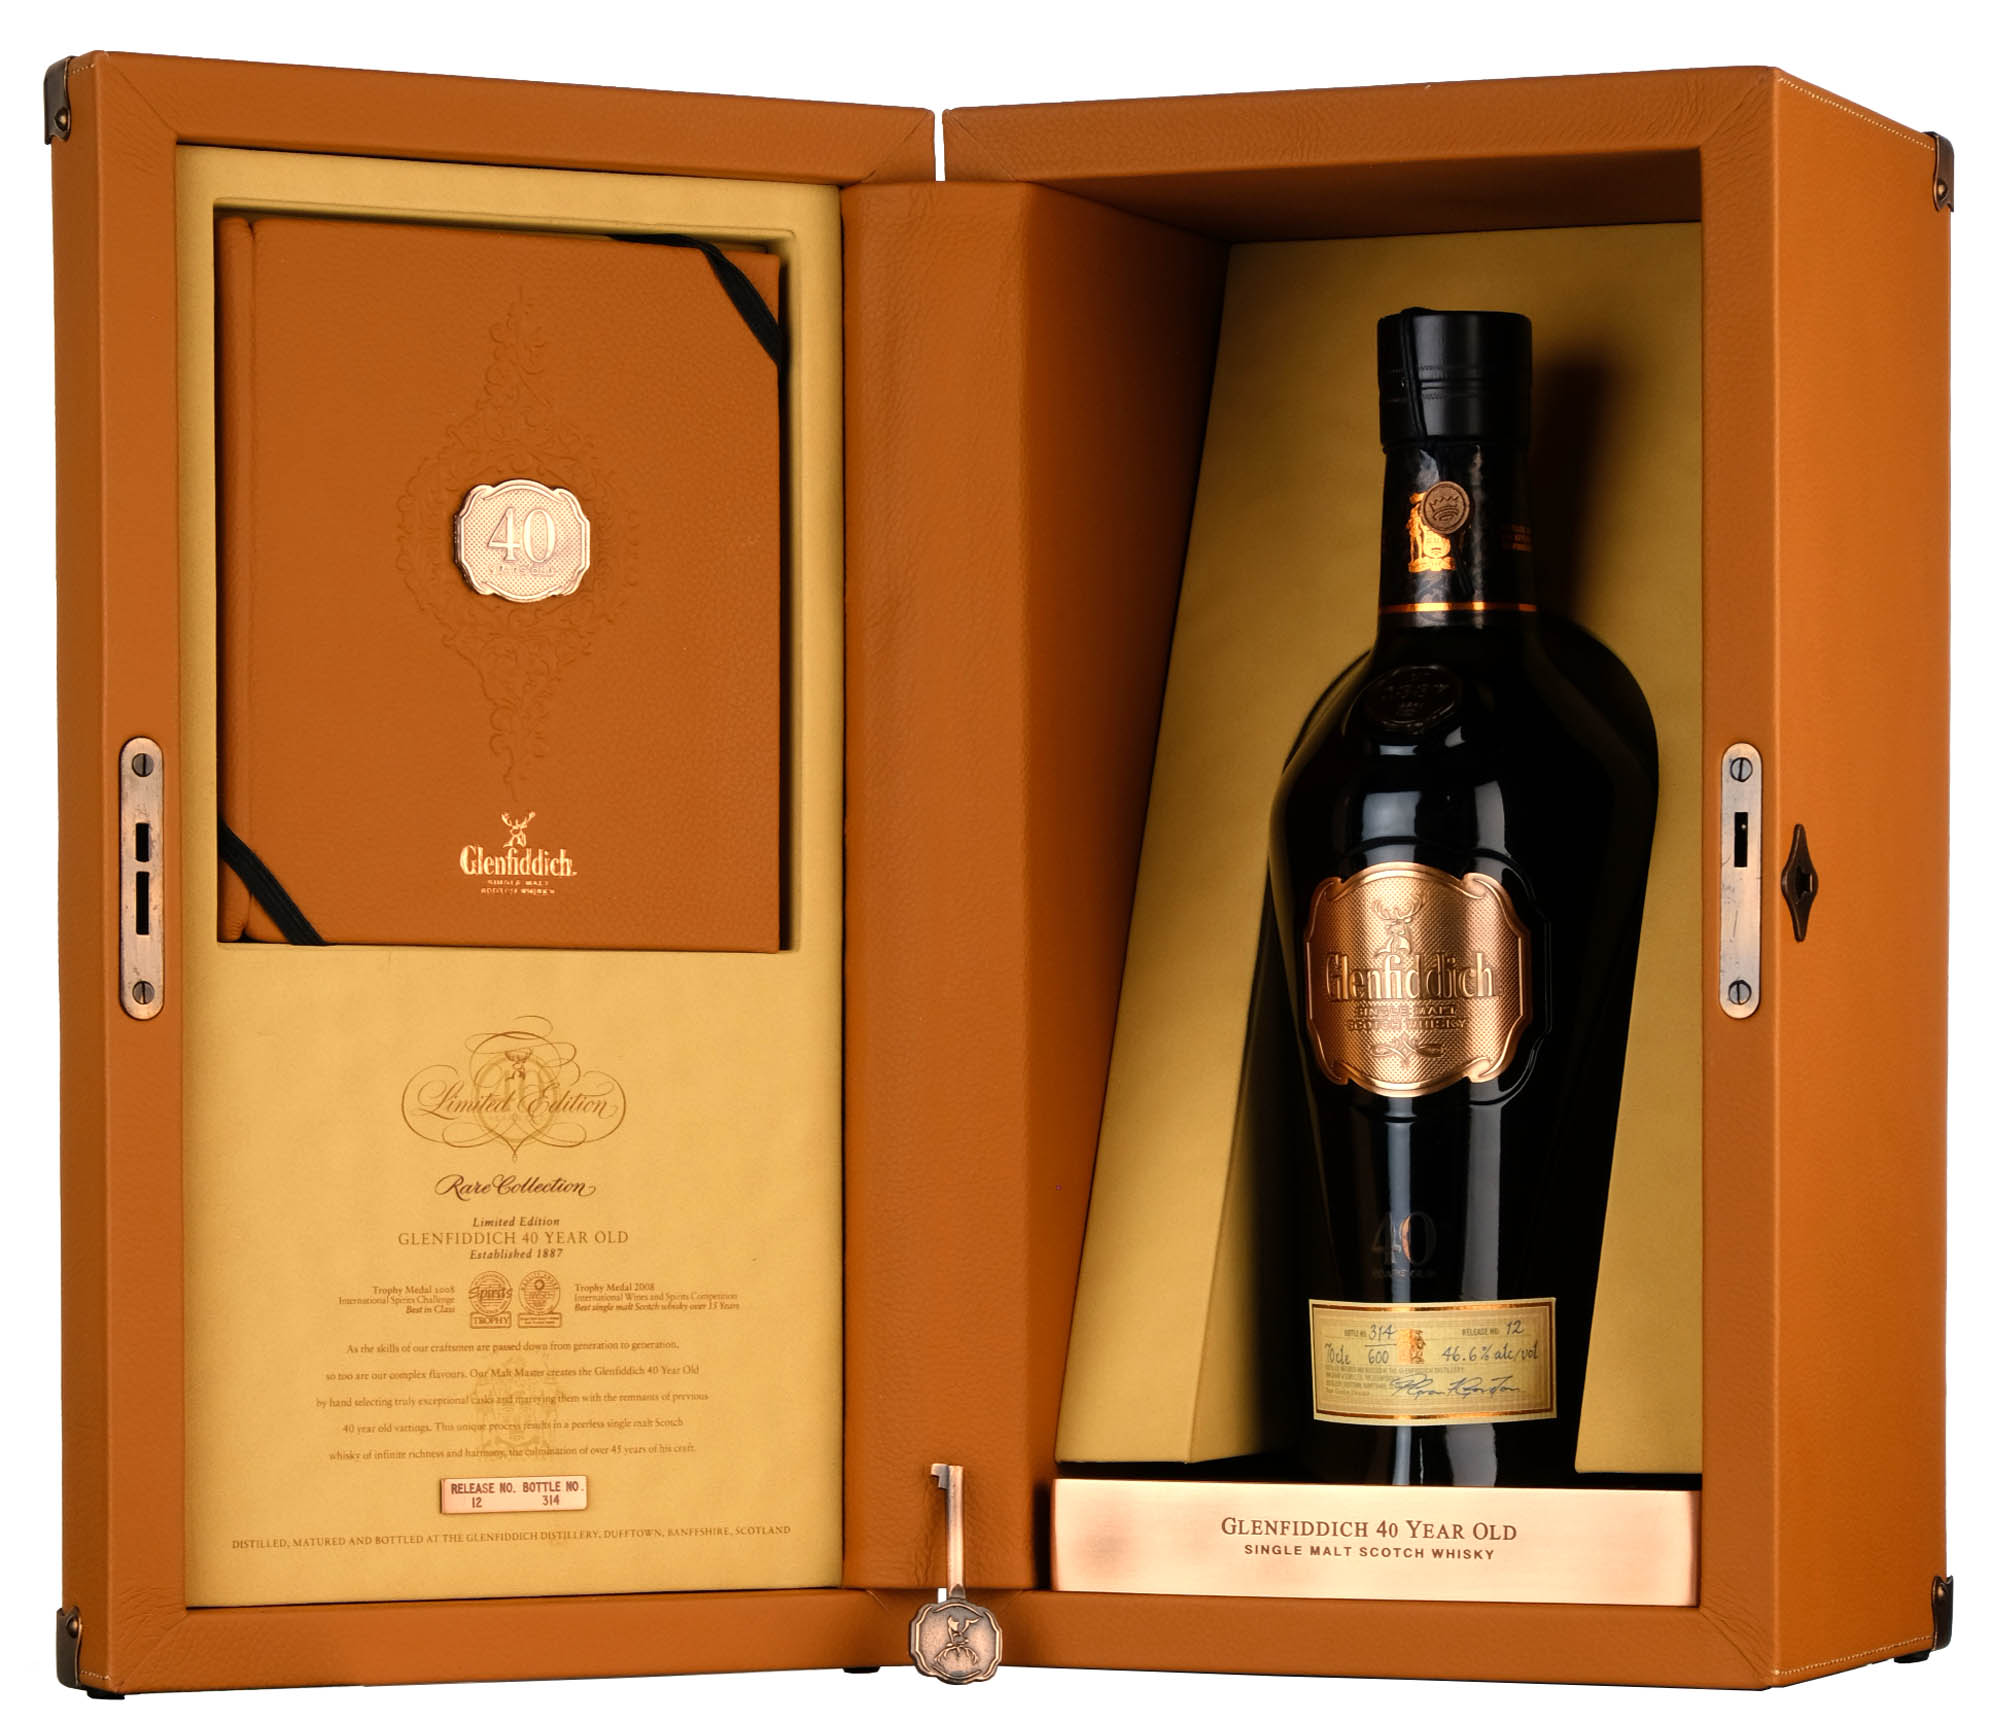 Glenfiddich 40 Year Old Shop Whisky-Online Release - 12th